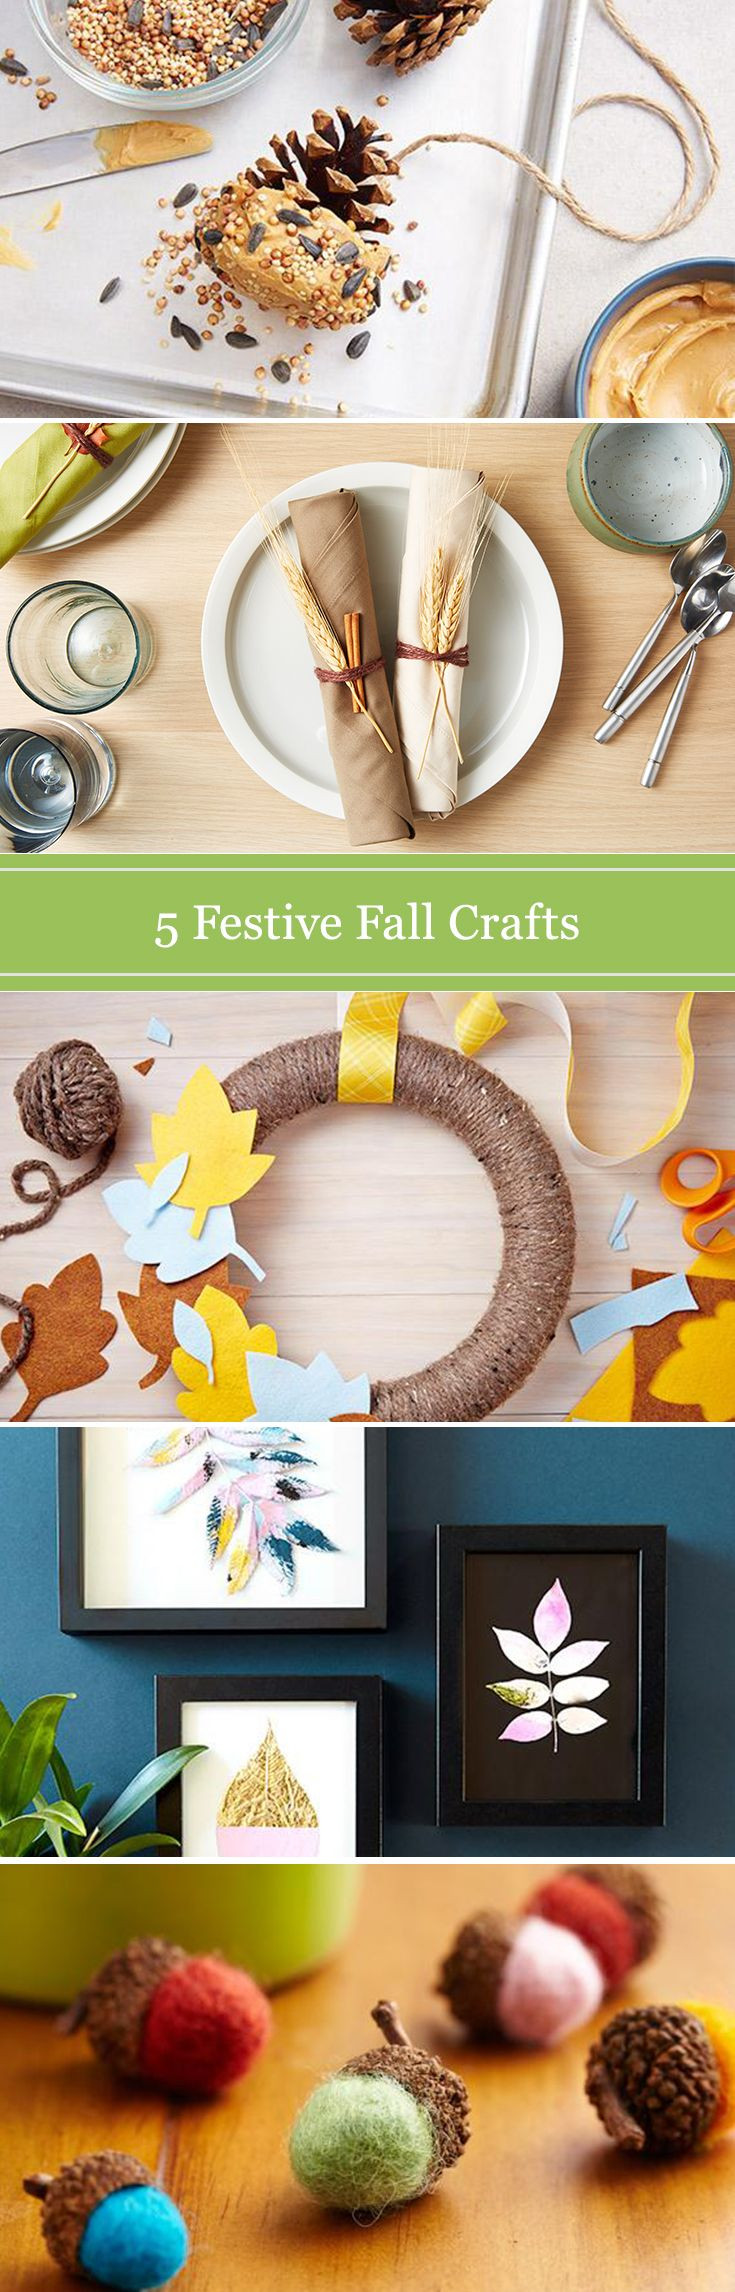 Easy Adult Crafts
 51 best Craft Ideas for Adults images on Pinterest